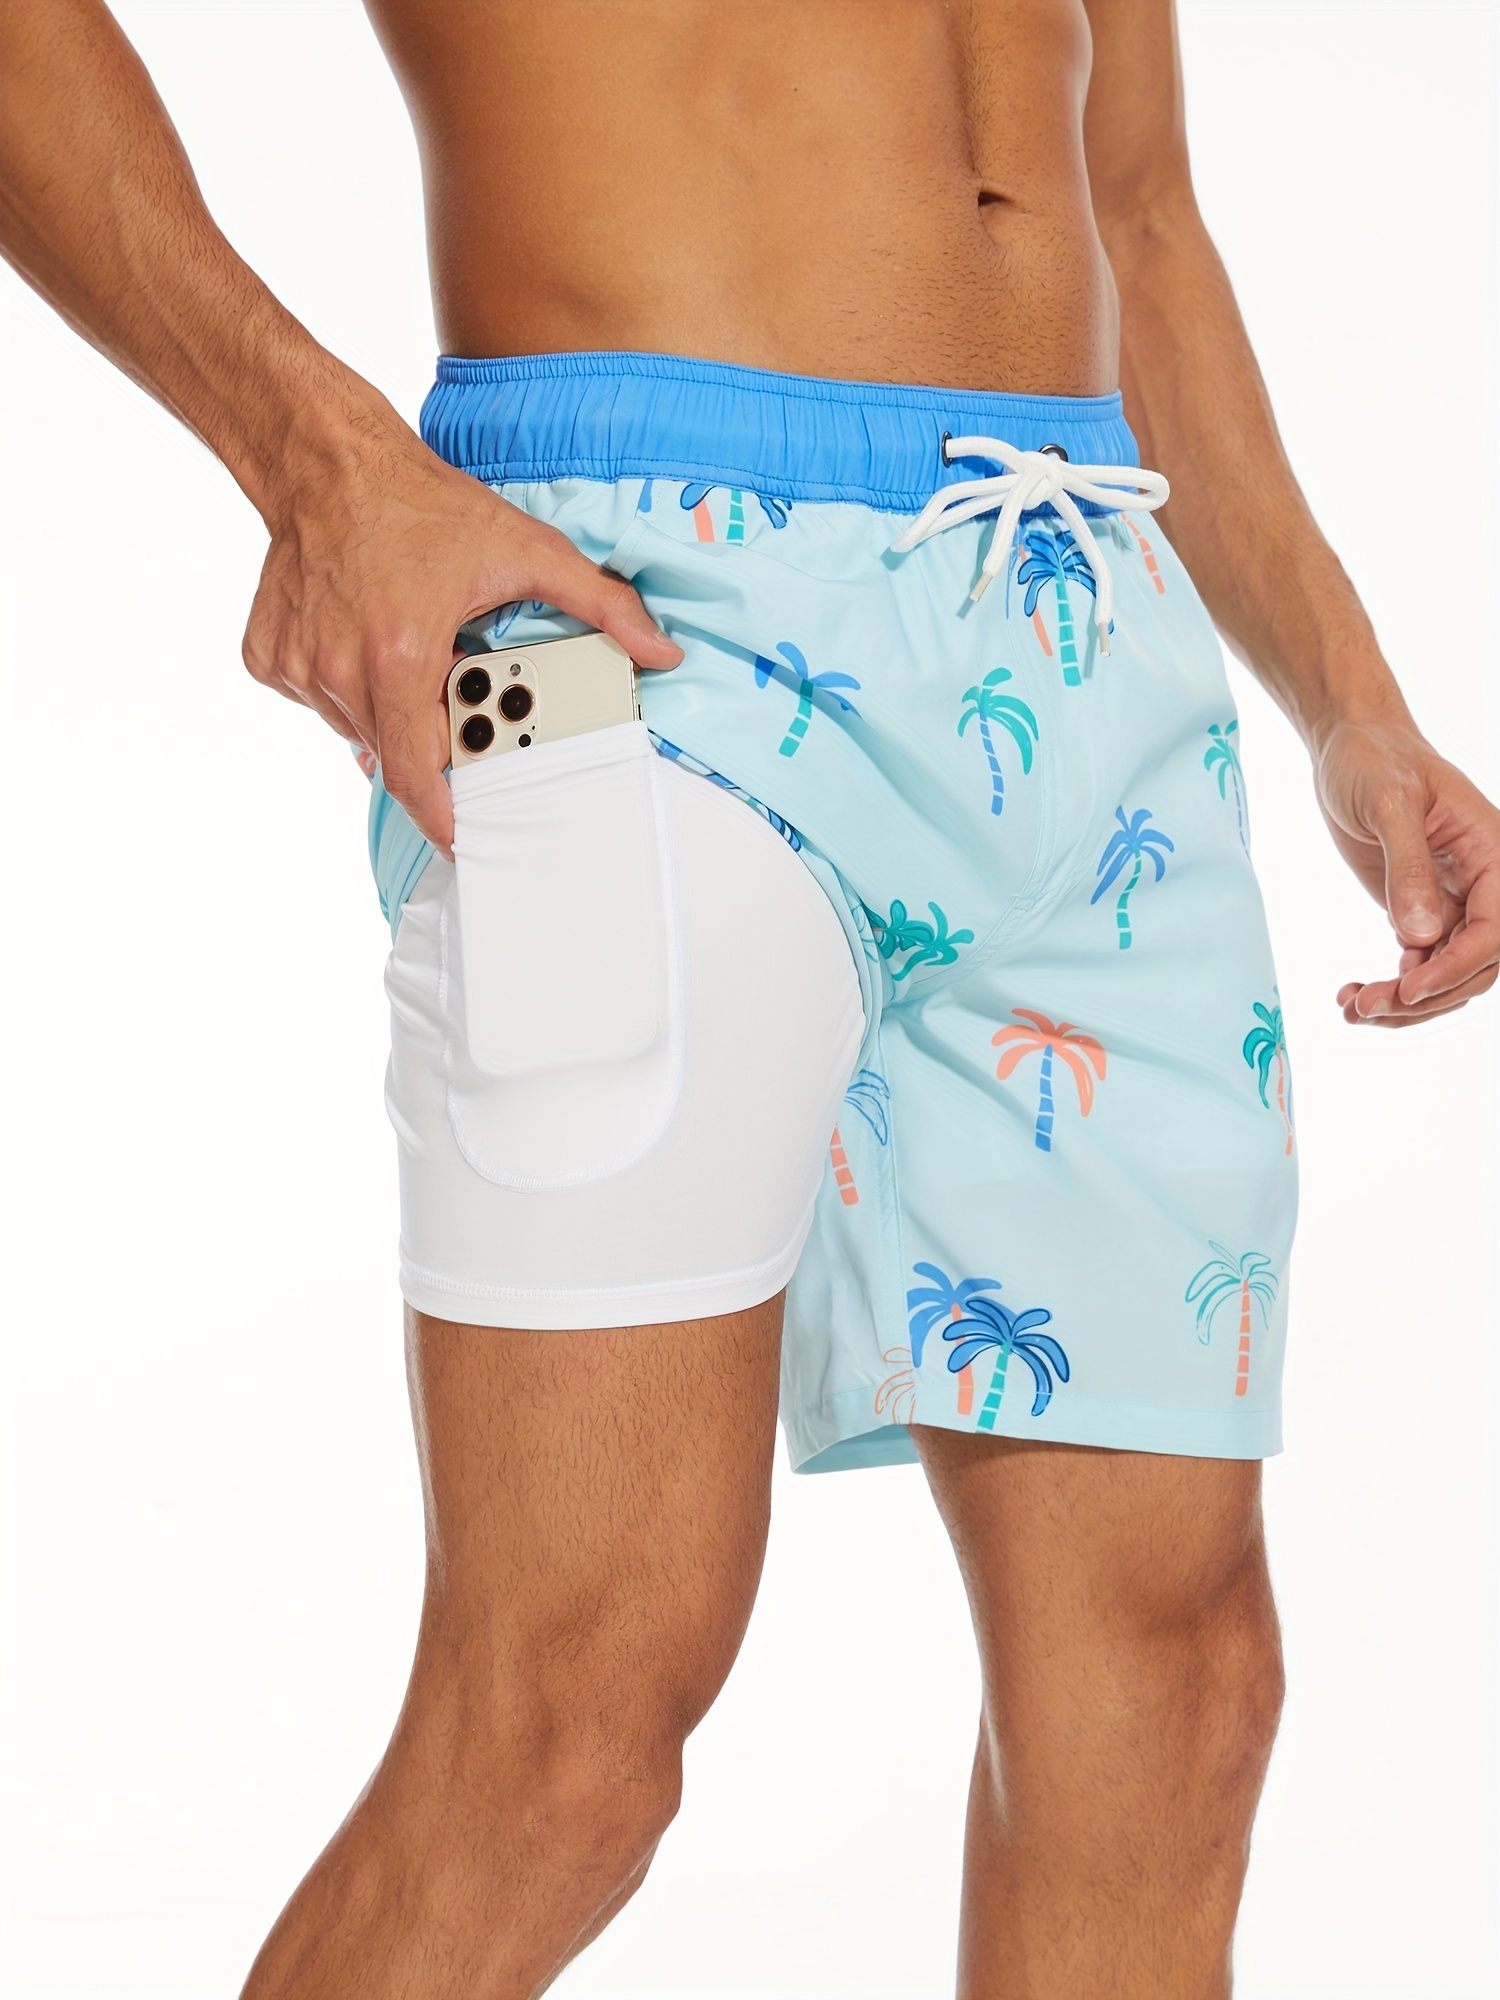 DG-Direct Men's Quick-drying Performance Fishing Beach Sun Protection Shorts Summer Vacation Travel Breathable Drawstring Daily School Holiday Street